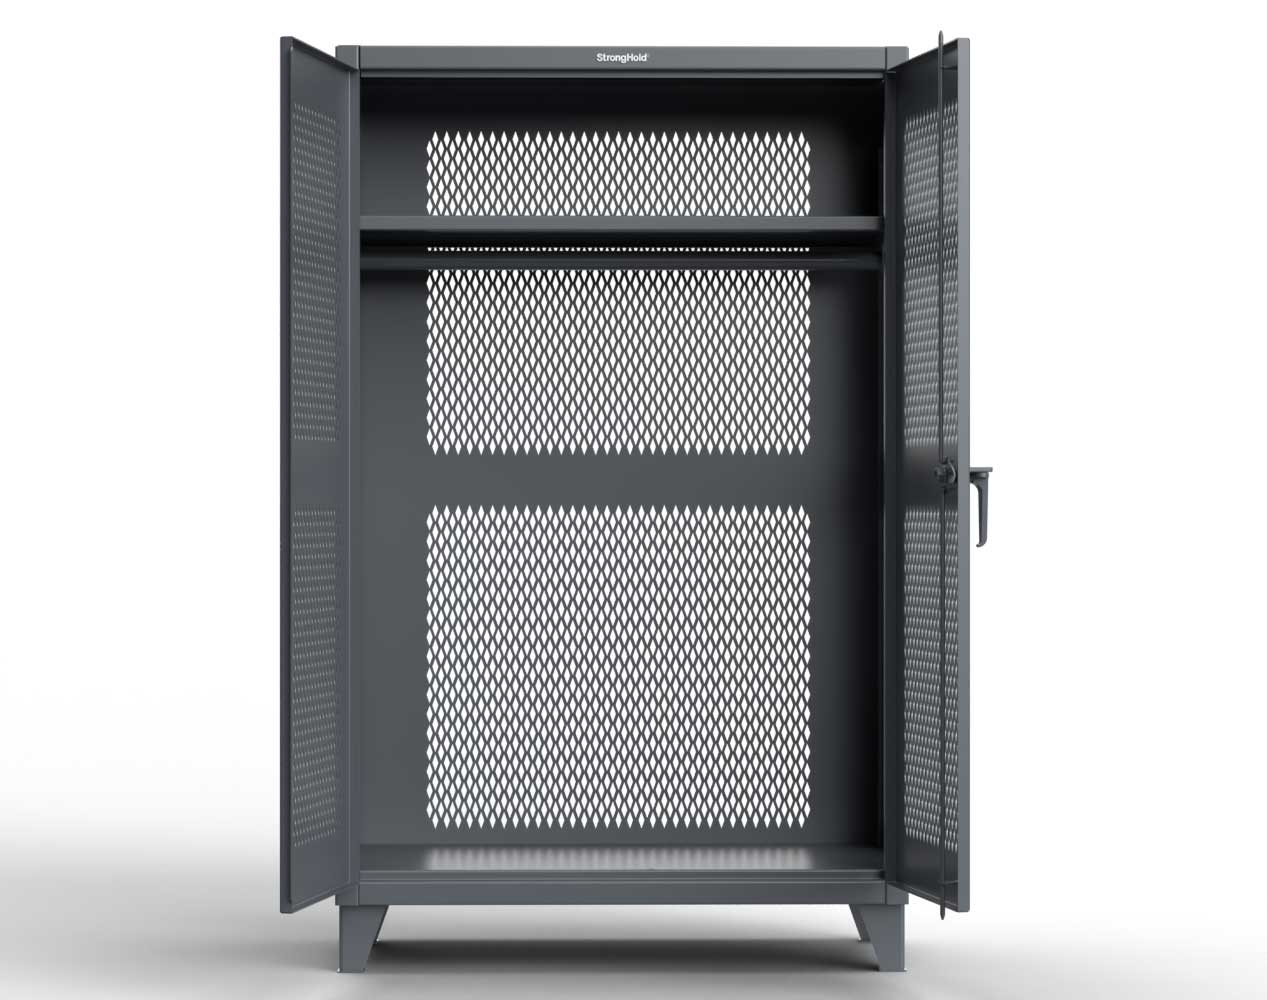 Extreme Duty 12 GA Fully-Ventilated Uniform Cabinet with Hanger Rod, 1 Shelf - 72 In. W x 24 In. D x 78 In. H